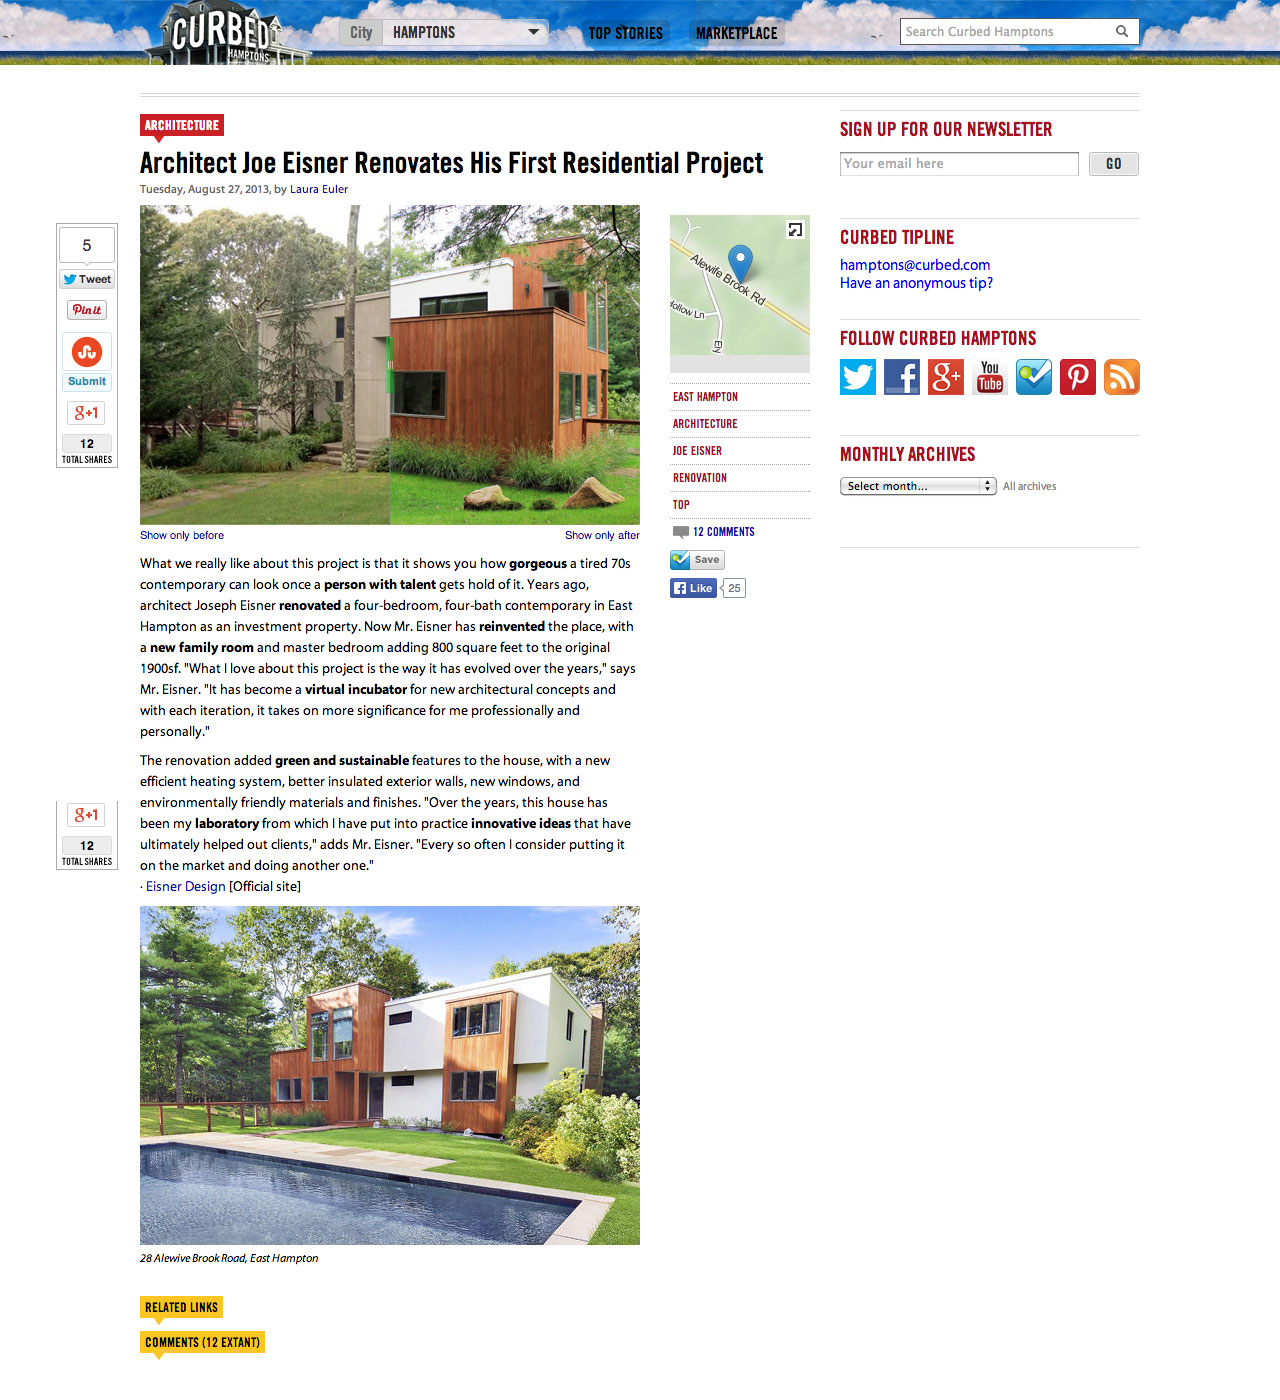 12_News_Curbed-Alewive-East-Hamptions-NY_web_w1280